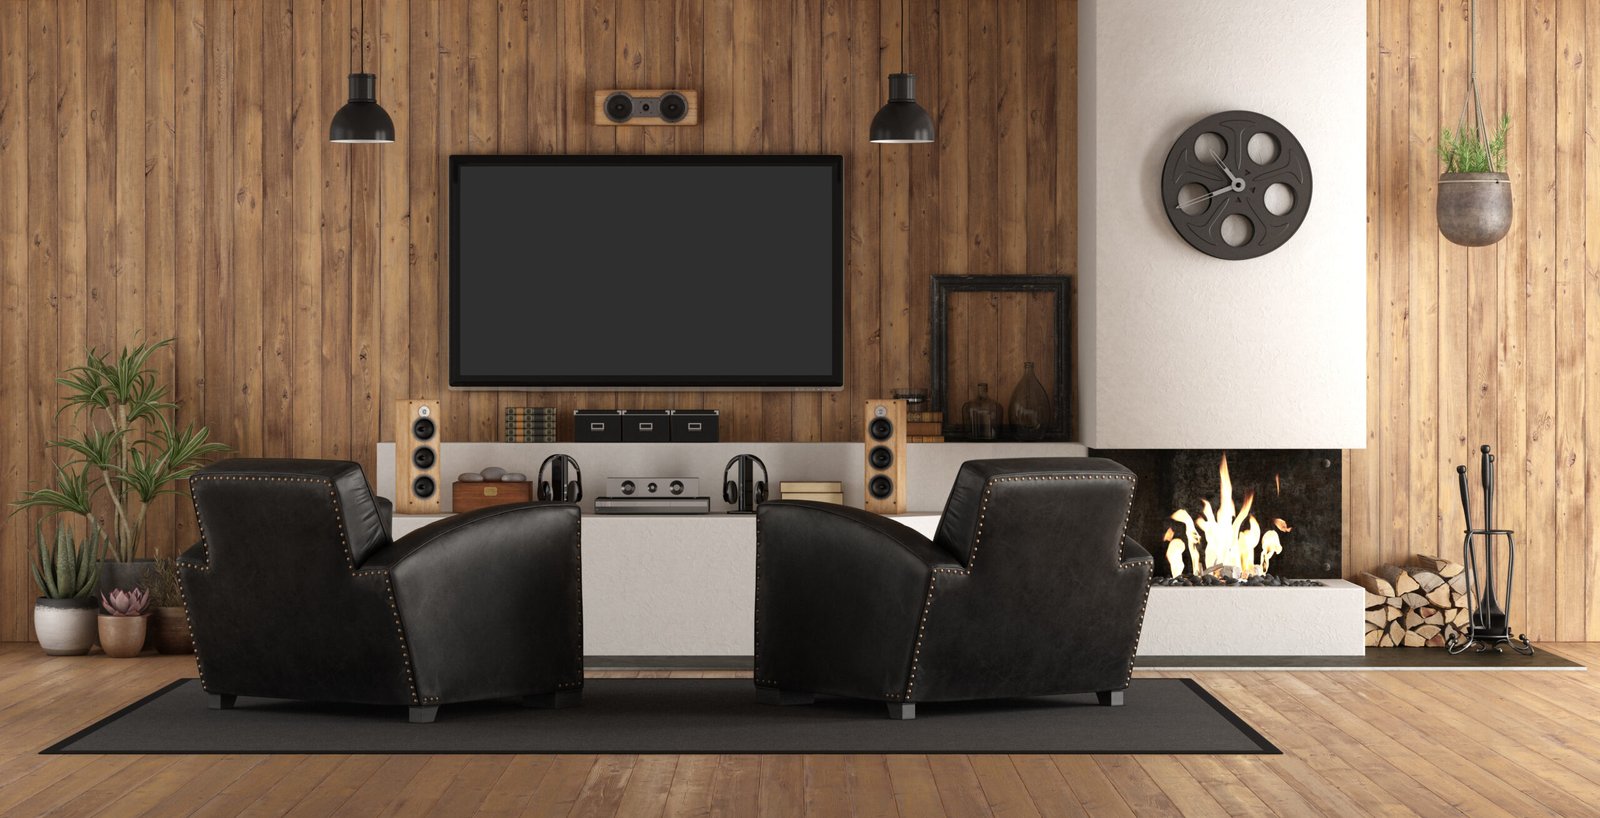 Home Theatre Surround Sound Audio Setups in Vernon, Bc. Installed by the Experts at Mission Audio Visual